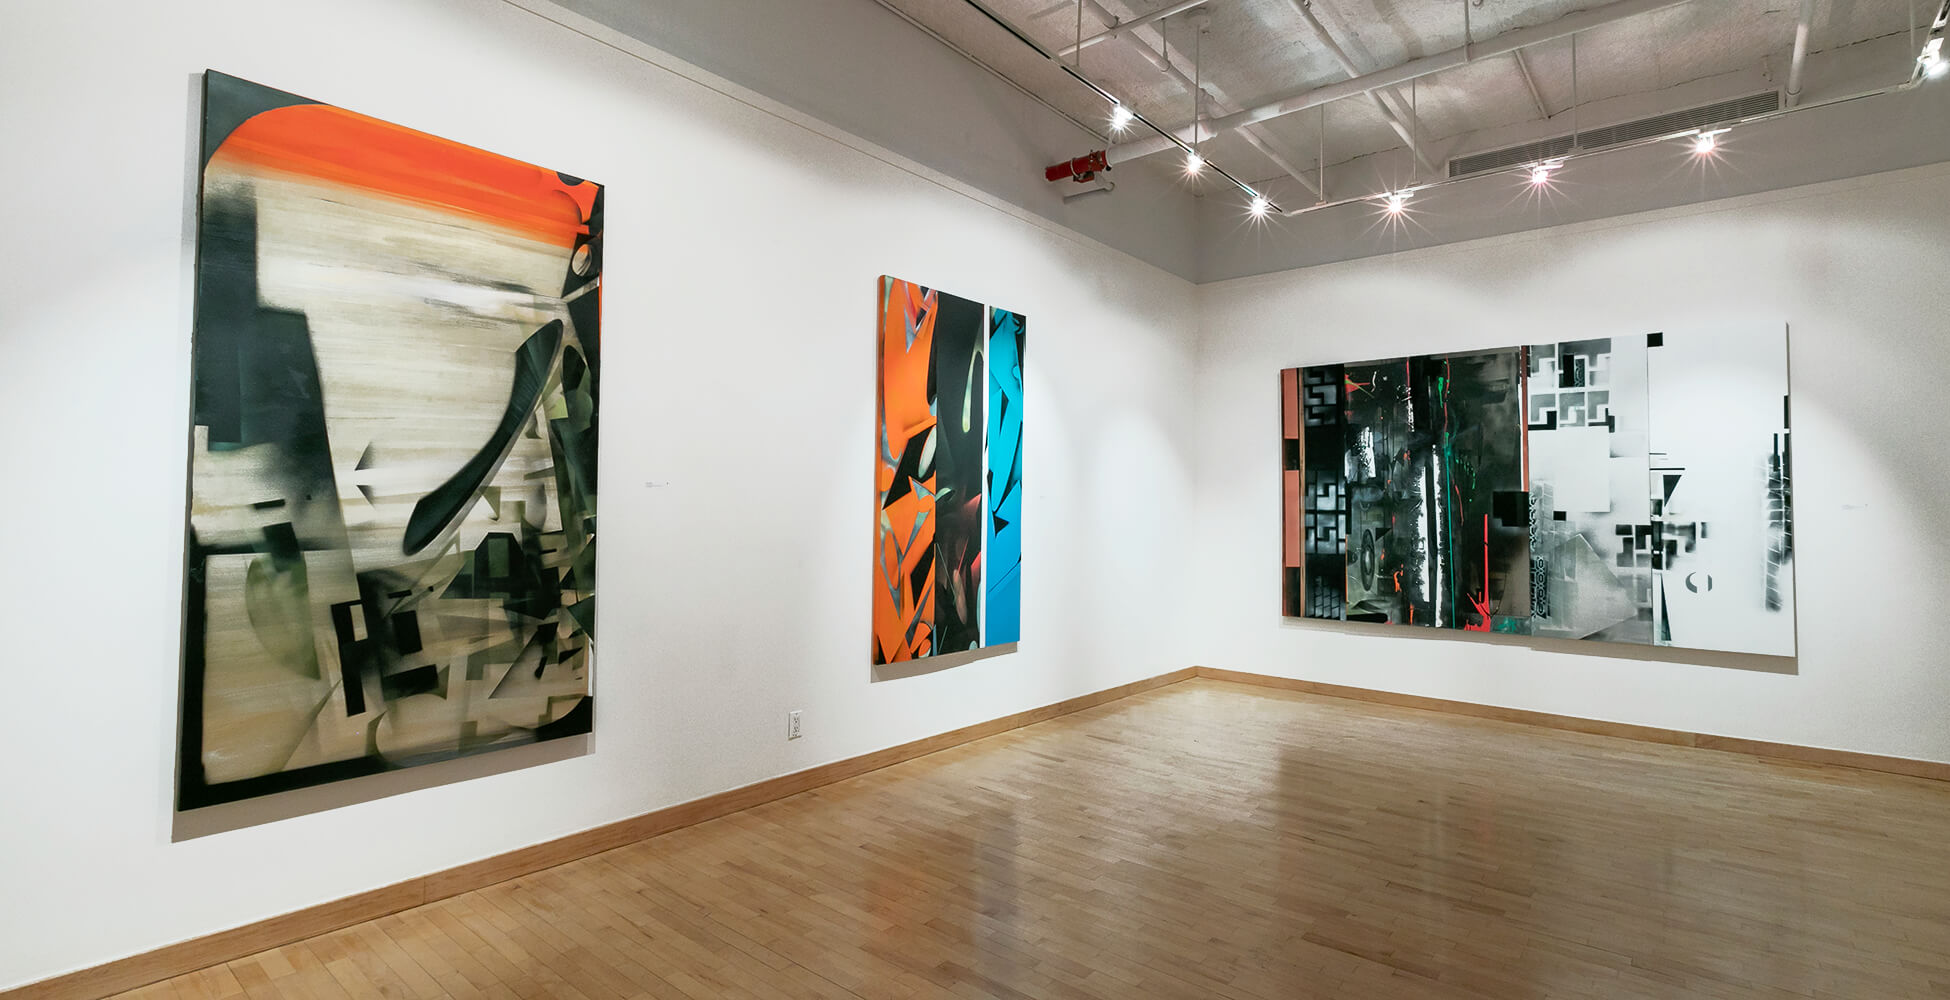 Installation View #4 of Nola Zirin's recent exhibition entitled 'Assembling Chaos' at June Kelly Gallery, Spring 2022.